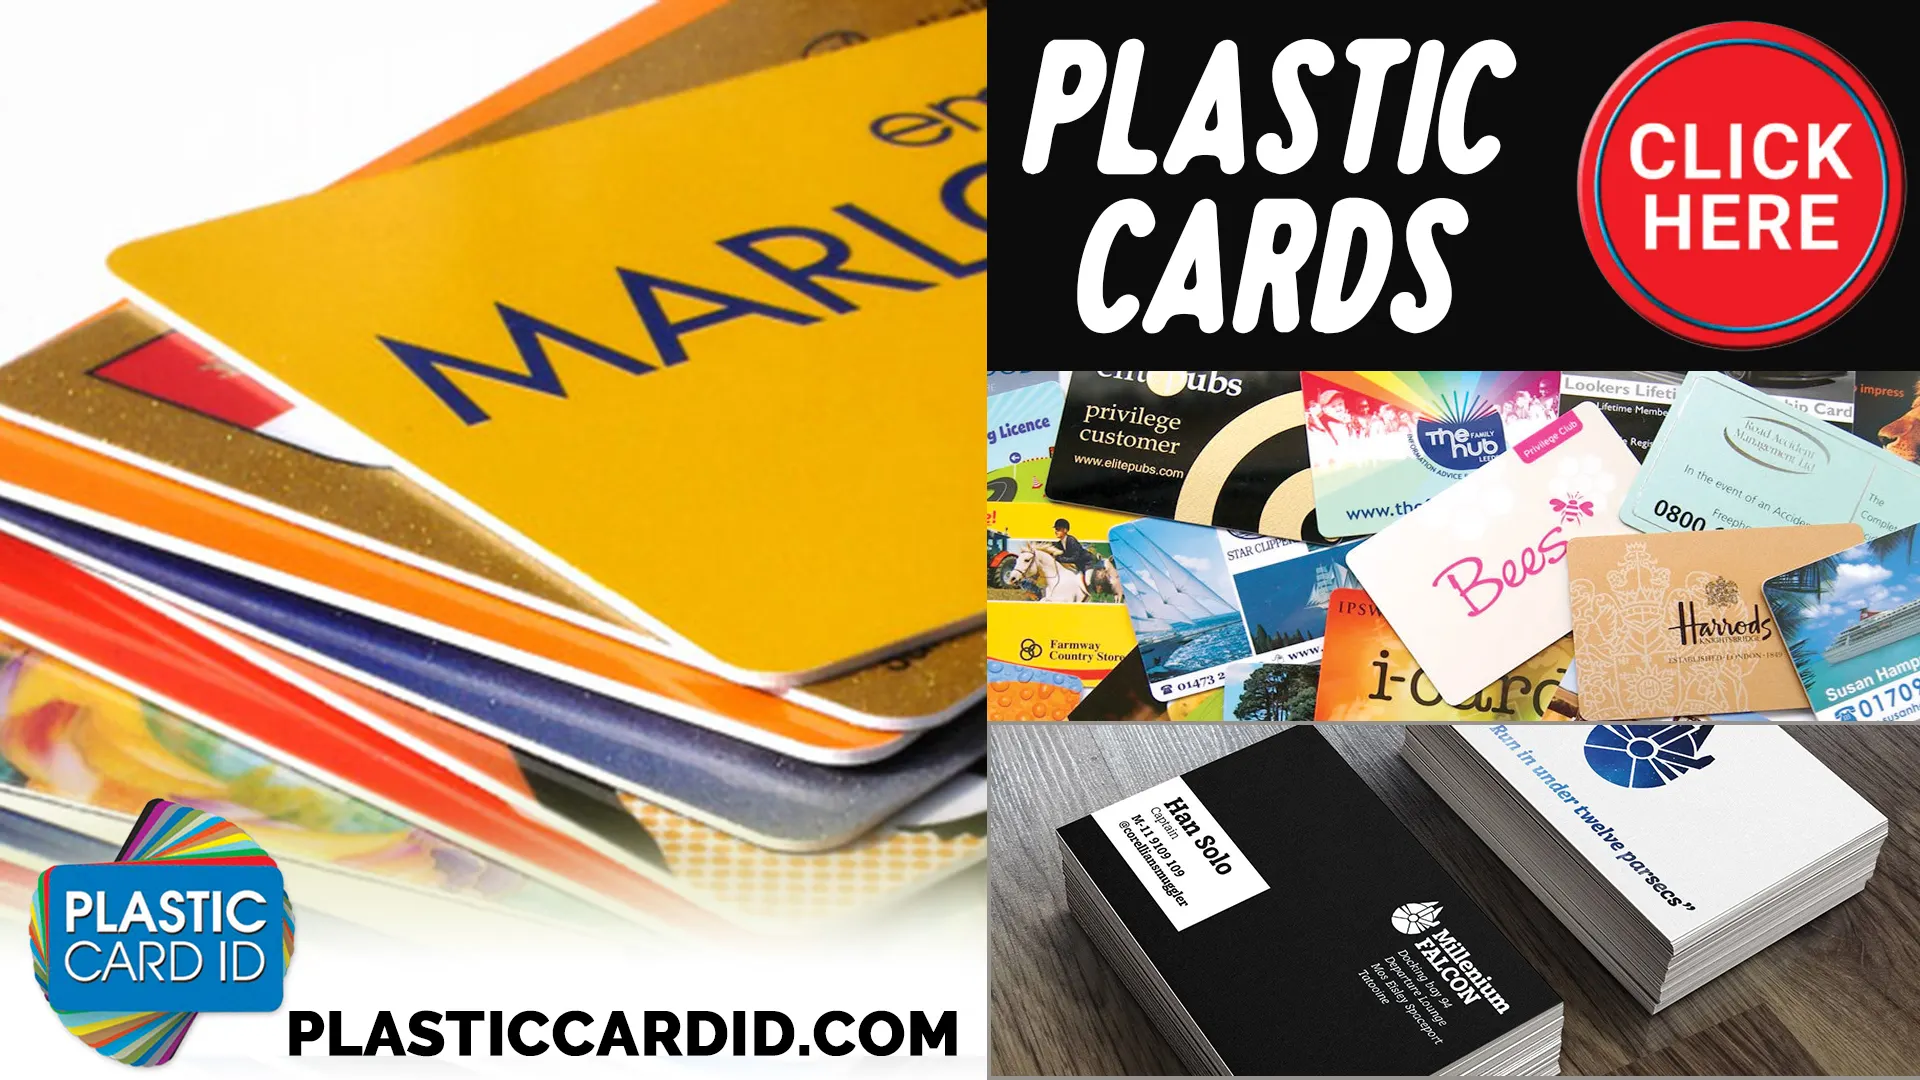 Maximizing Your Networking ROI with Plastic Card ID
